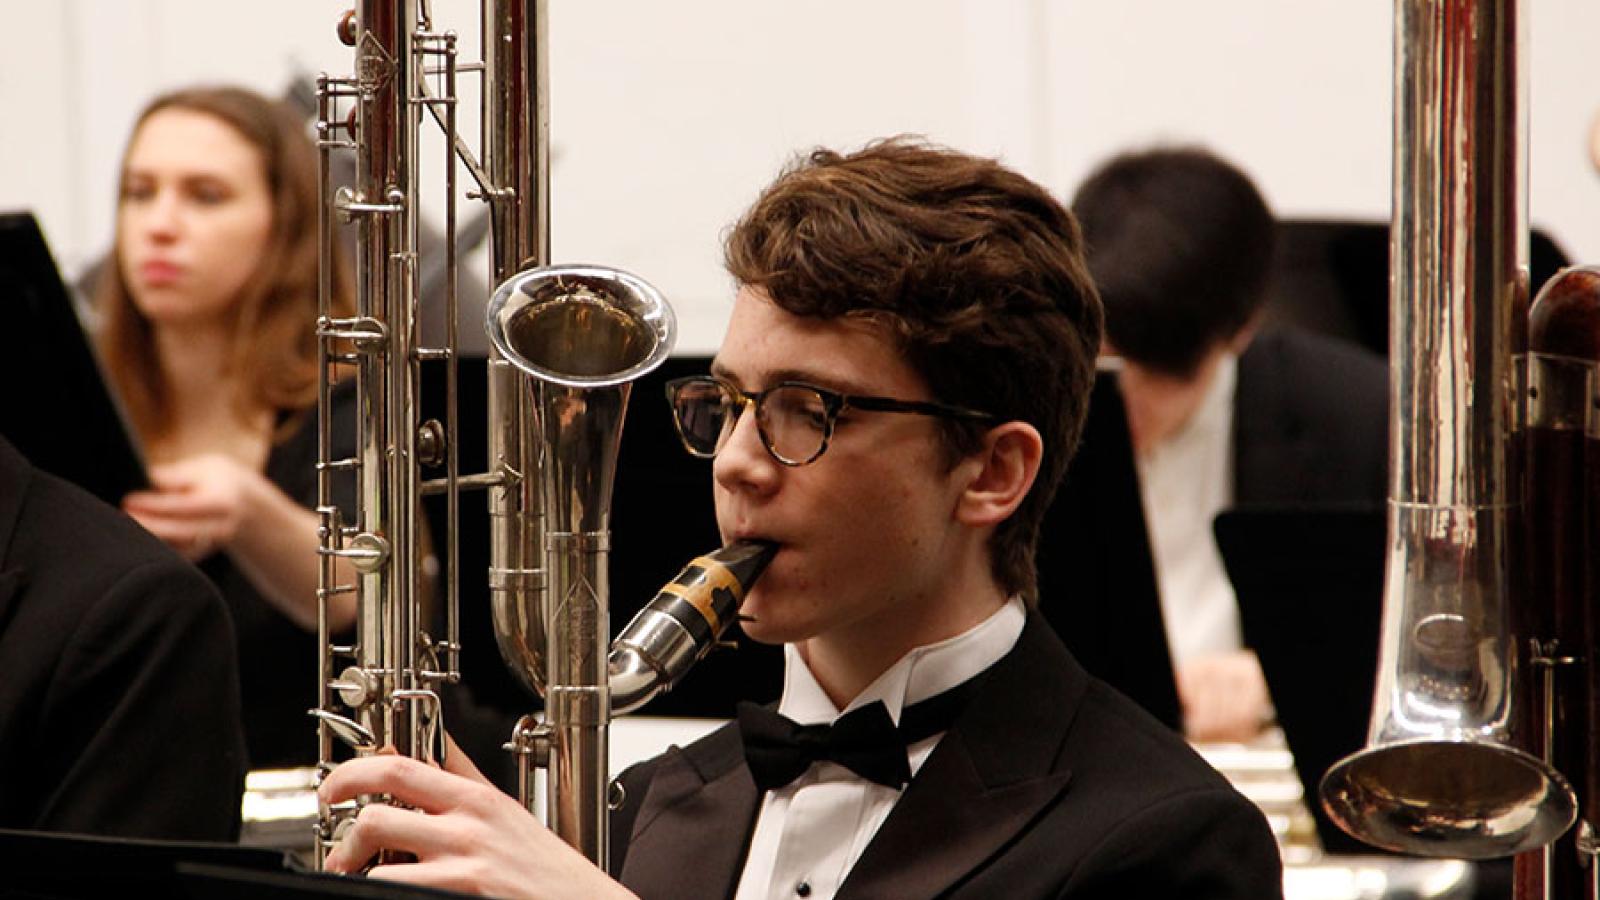 A boy playing contrabass clarinet